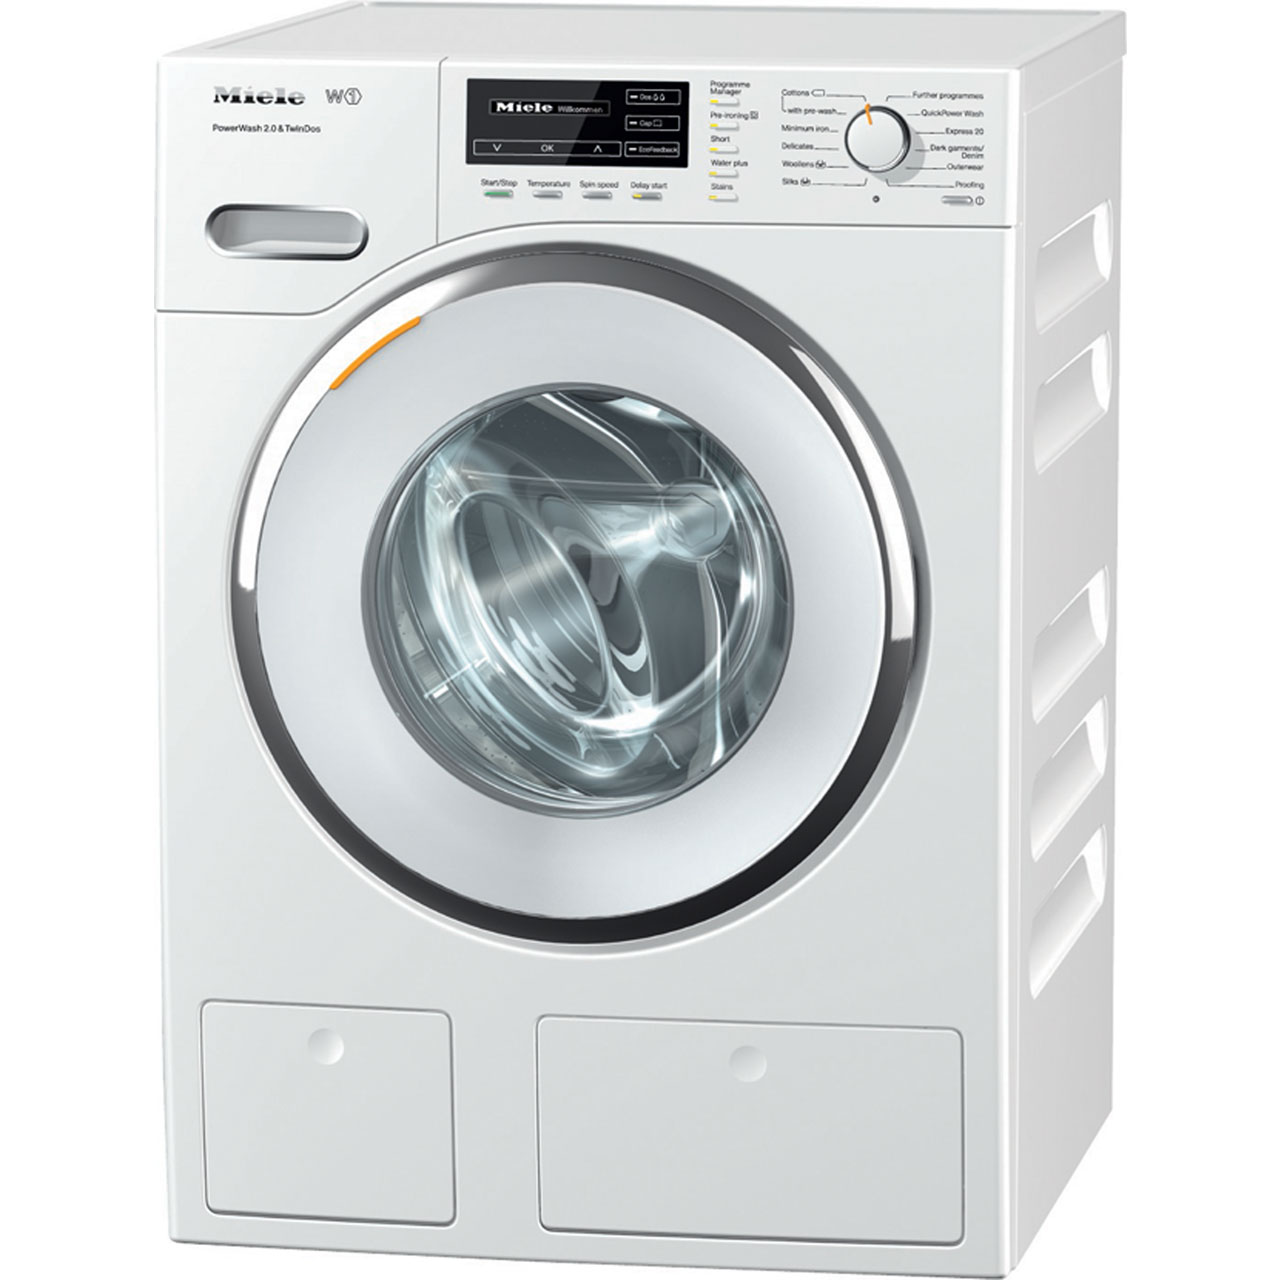 Miele W1 WMH122WPS 9Kg Washing Machine with 1600 rpm Review